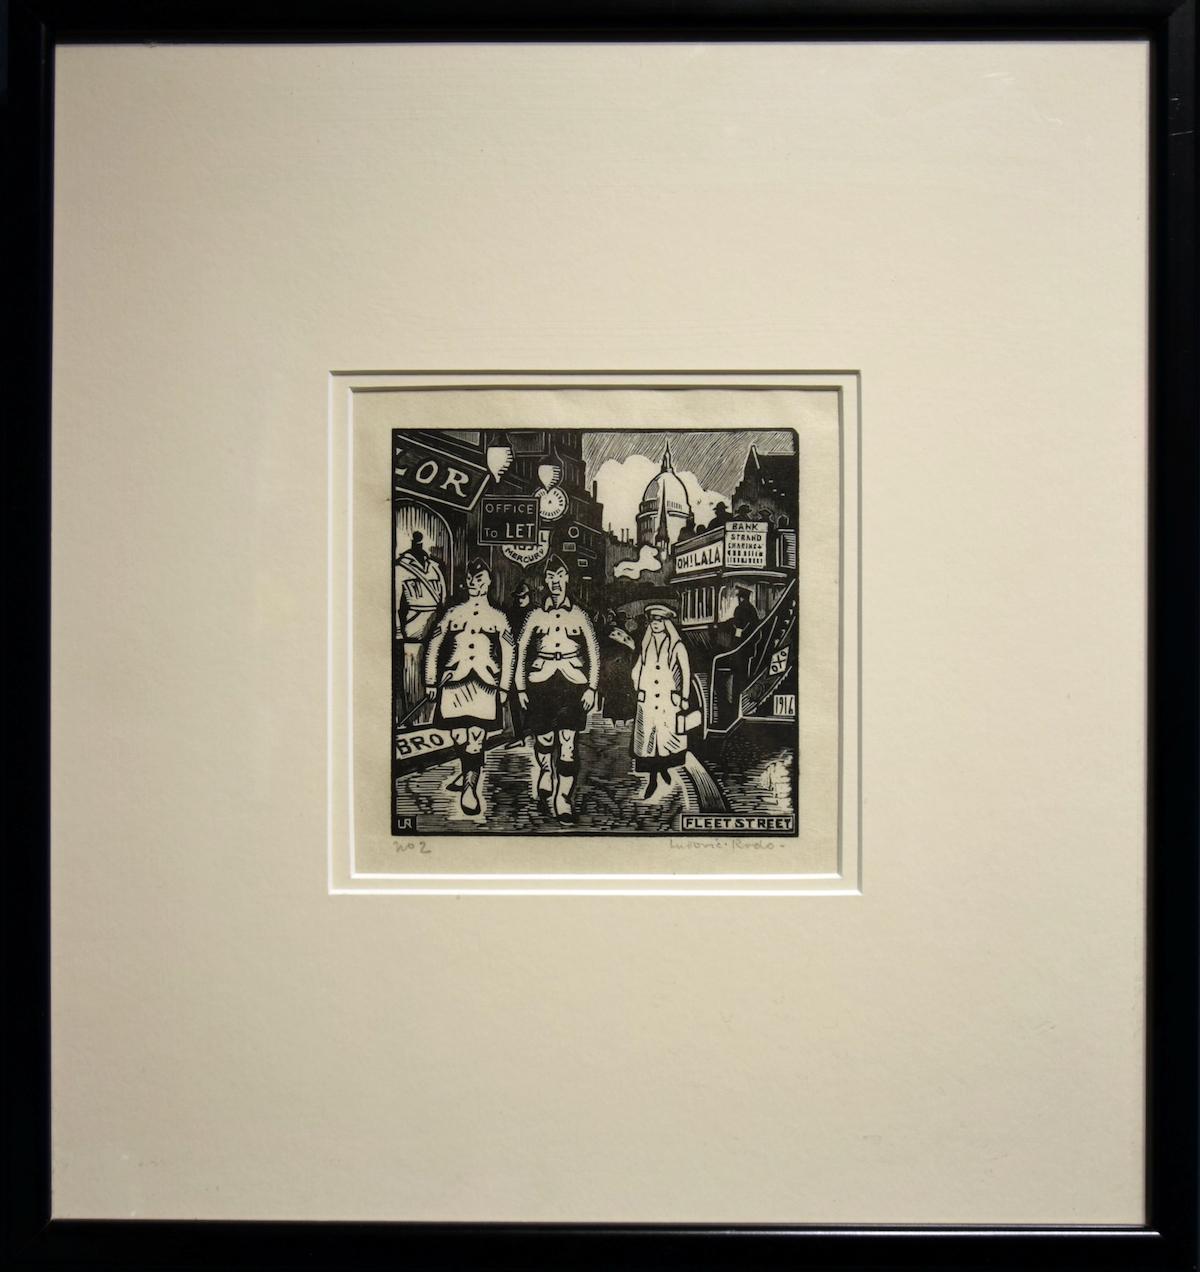 Fleet Street by Ludovic-Rodo Pissarro (1878-1952)
Wood engraving
11.2 x 11.2 cm (4 ³/₈ x 4 ³/₈ inches)
Initialled, titled and dated on the plate
Signed lower right, Ludovic-Rodo and numbered lower left, no 2
Executed circa 1918

Provenance
David